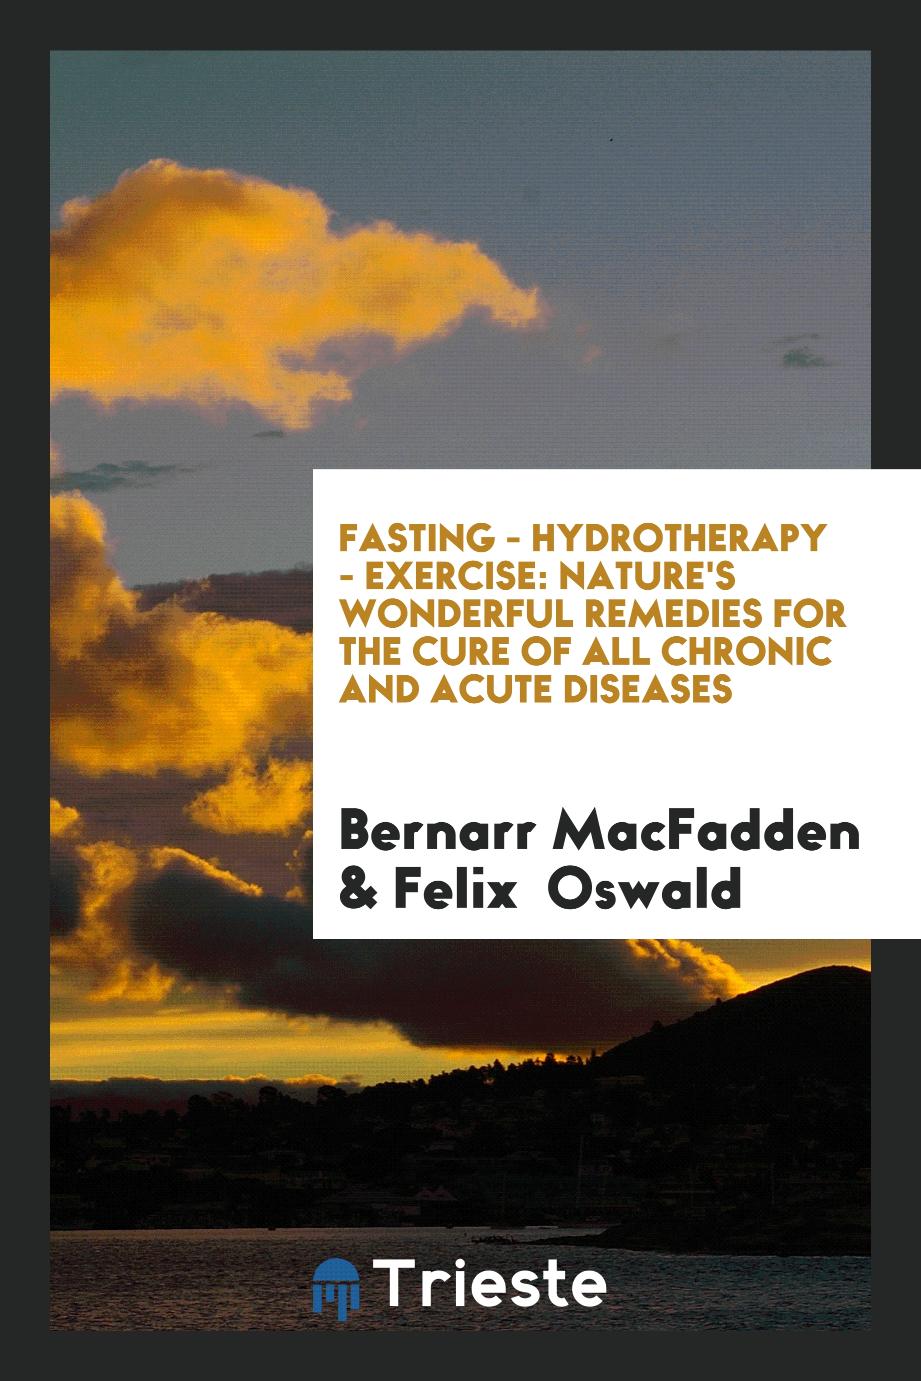 Fasting - Hydrotherapy - Exercise: Nature's Wonderful Remedies for the Cure of All Chronic and Acute Diseases